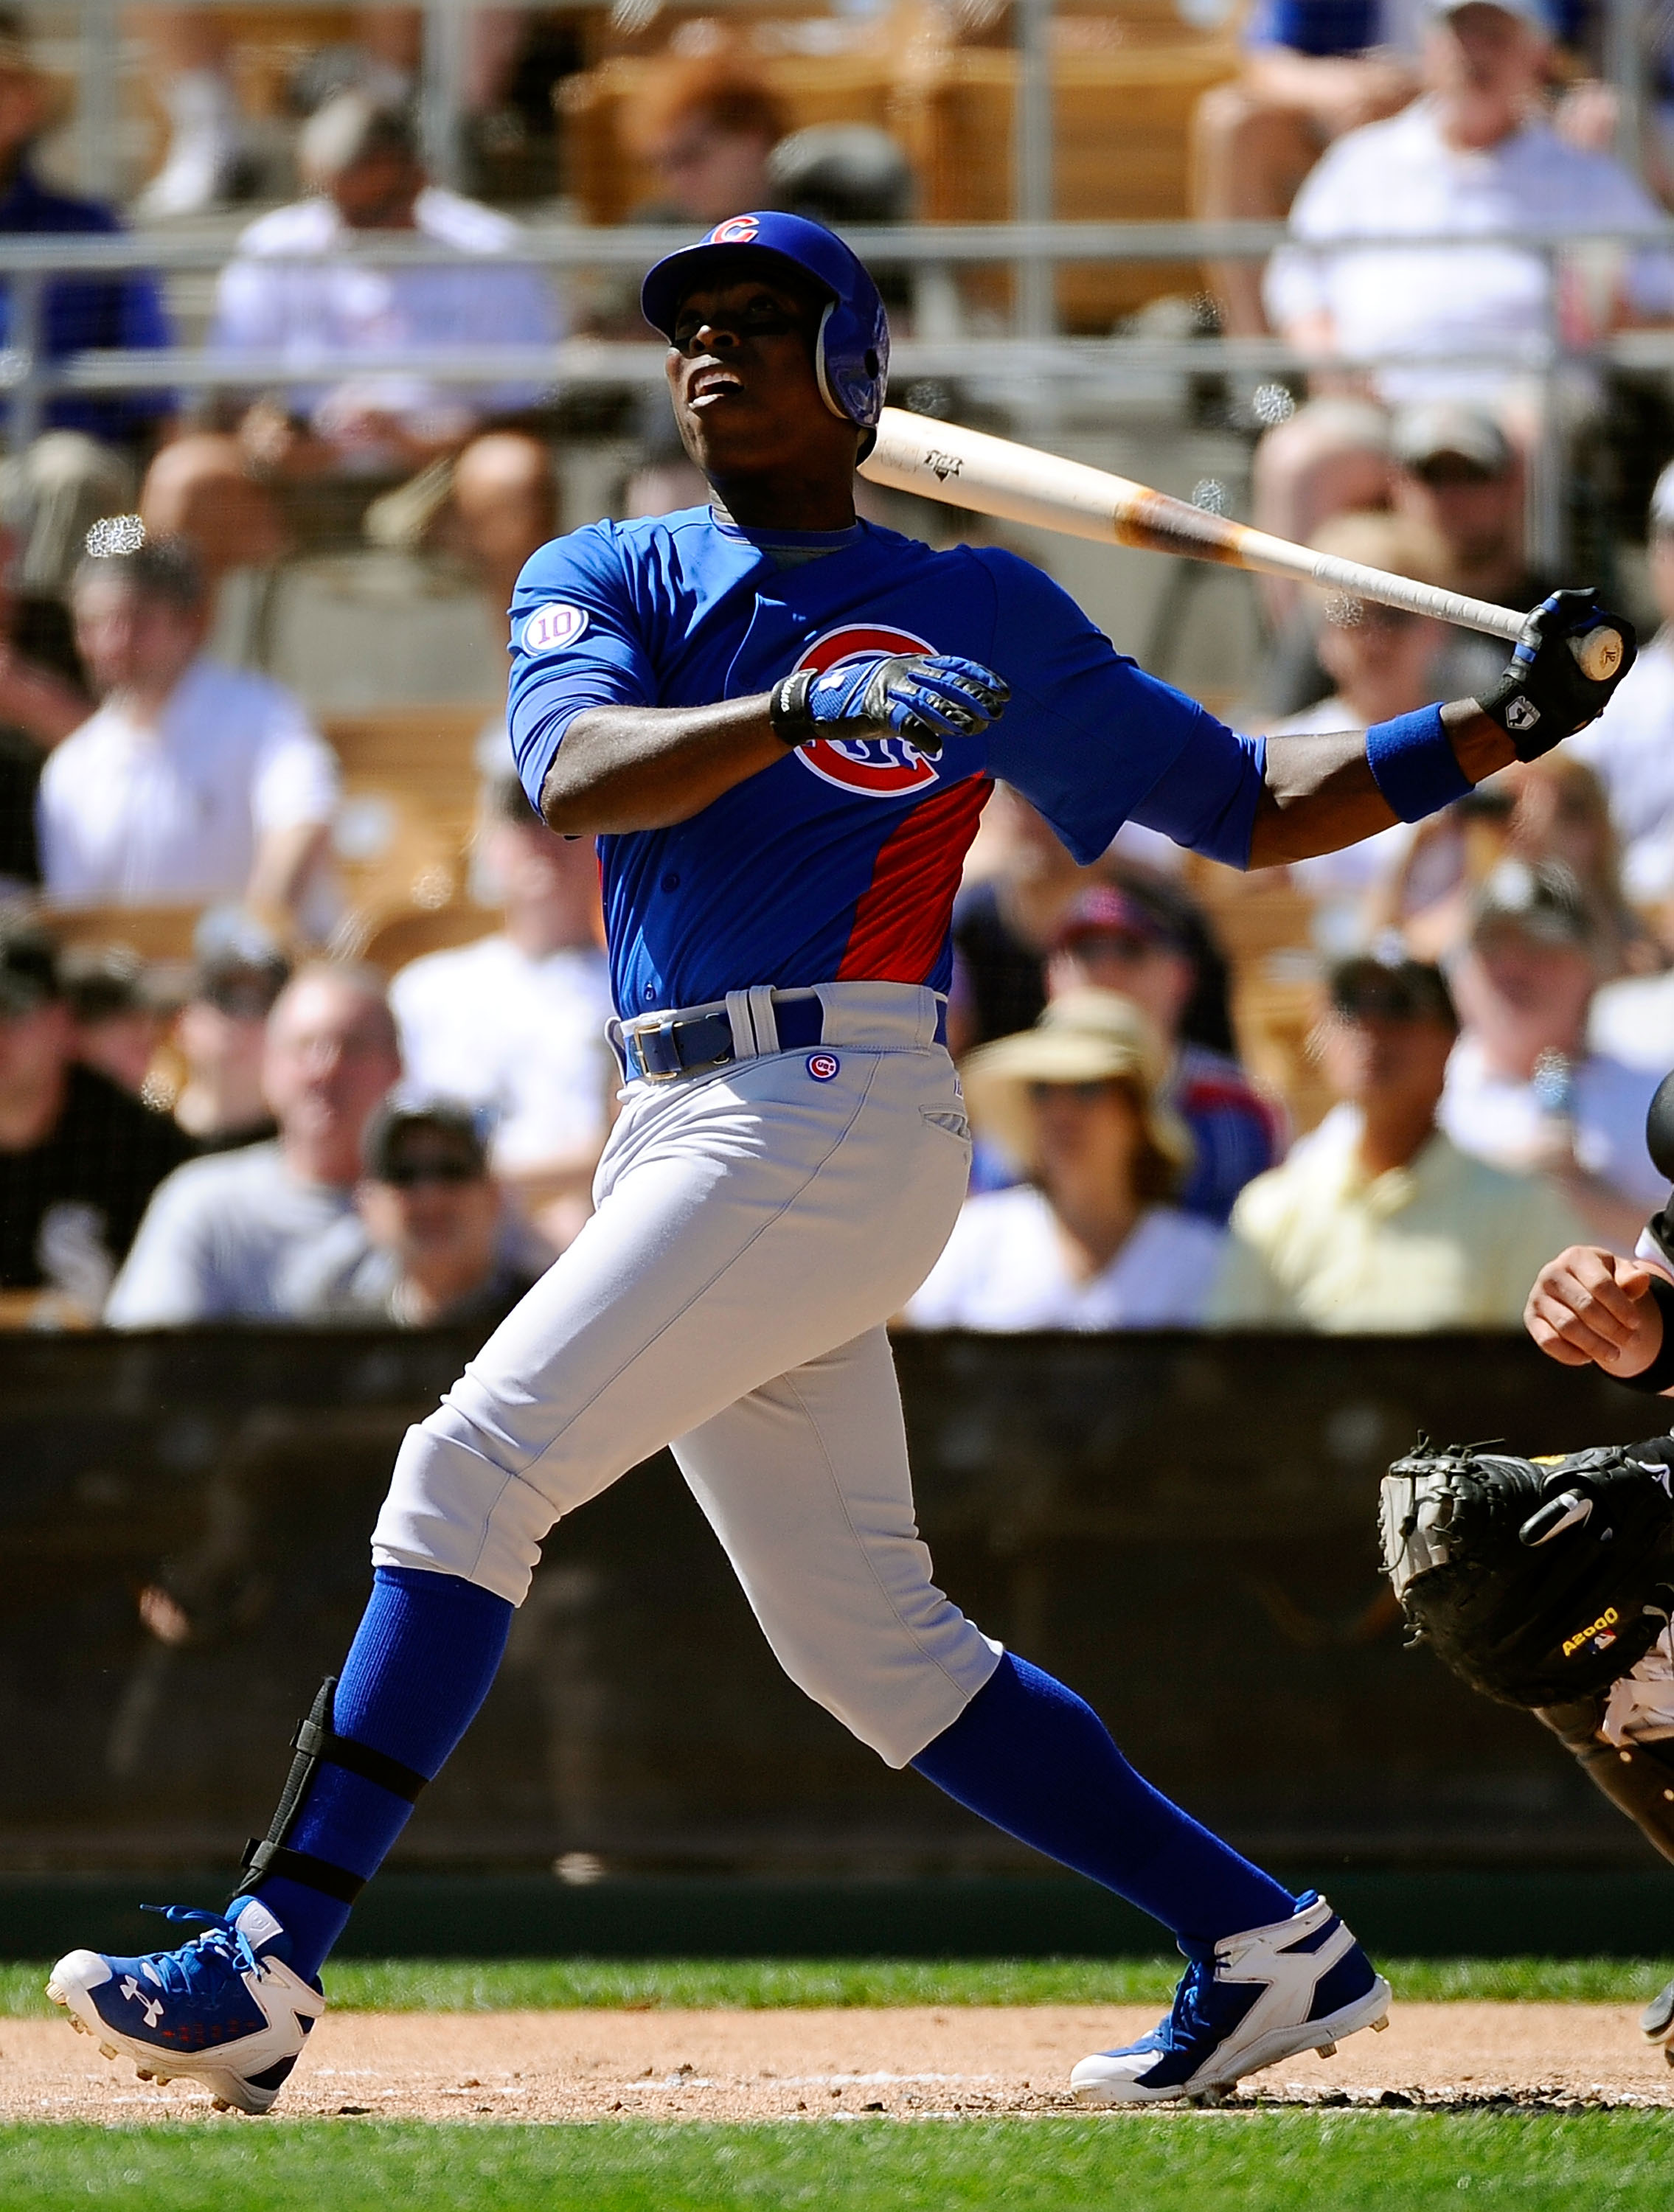 GLENDALE, AZ - MARCH 11:  Alfonso Soriano #12 of the Chicago Cubs plays against Chicago White Sox during the spring training baseball gameat Camelback Ranch on March 11, 2011 in Glendale, Arizona.  (Photo by Kevork Djansezian/Getty Images)